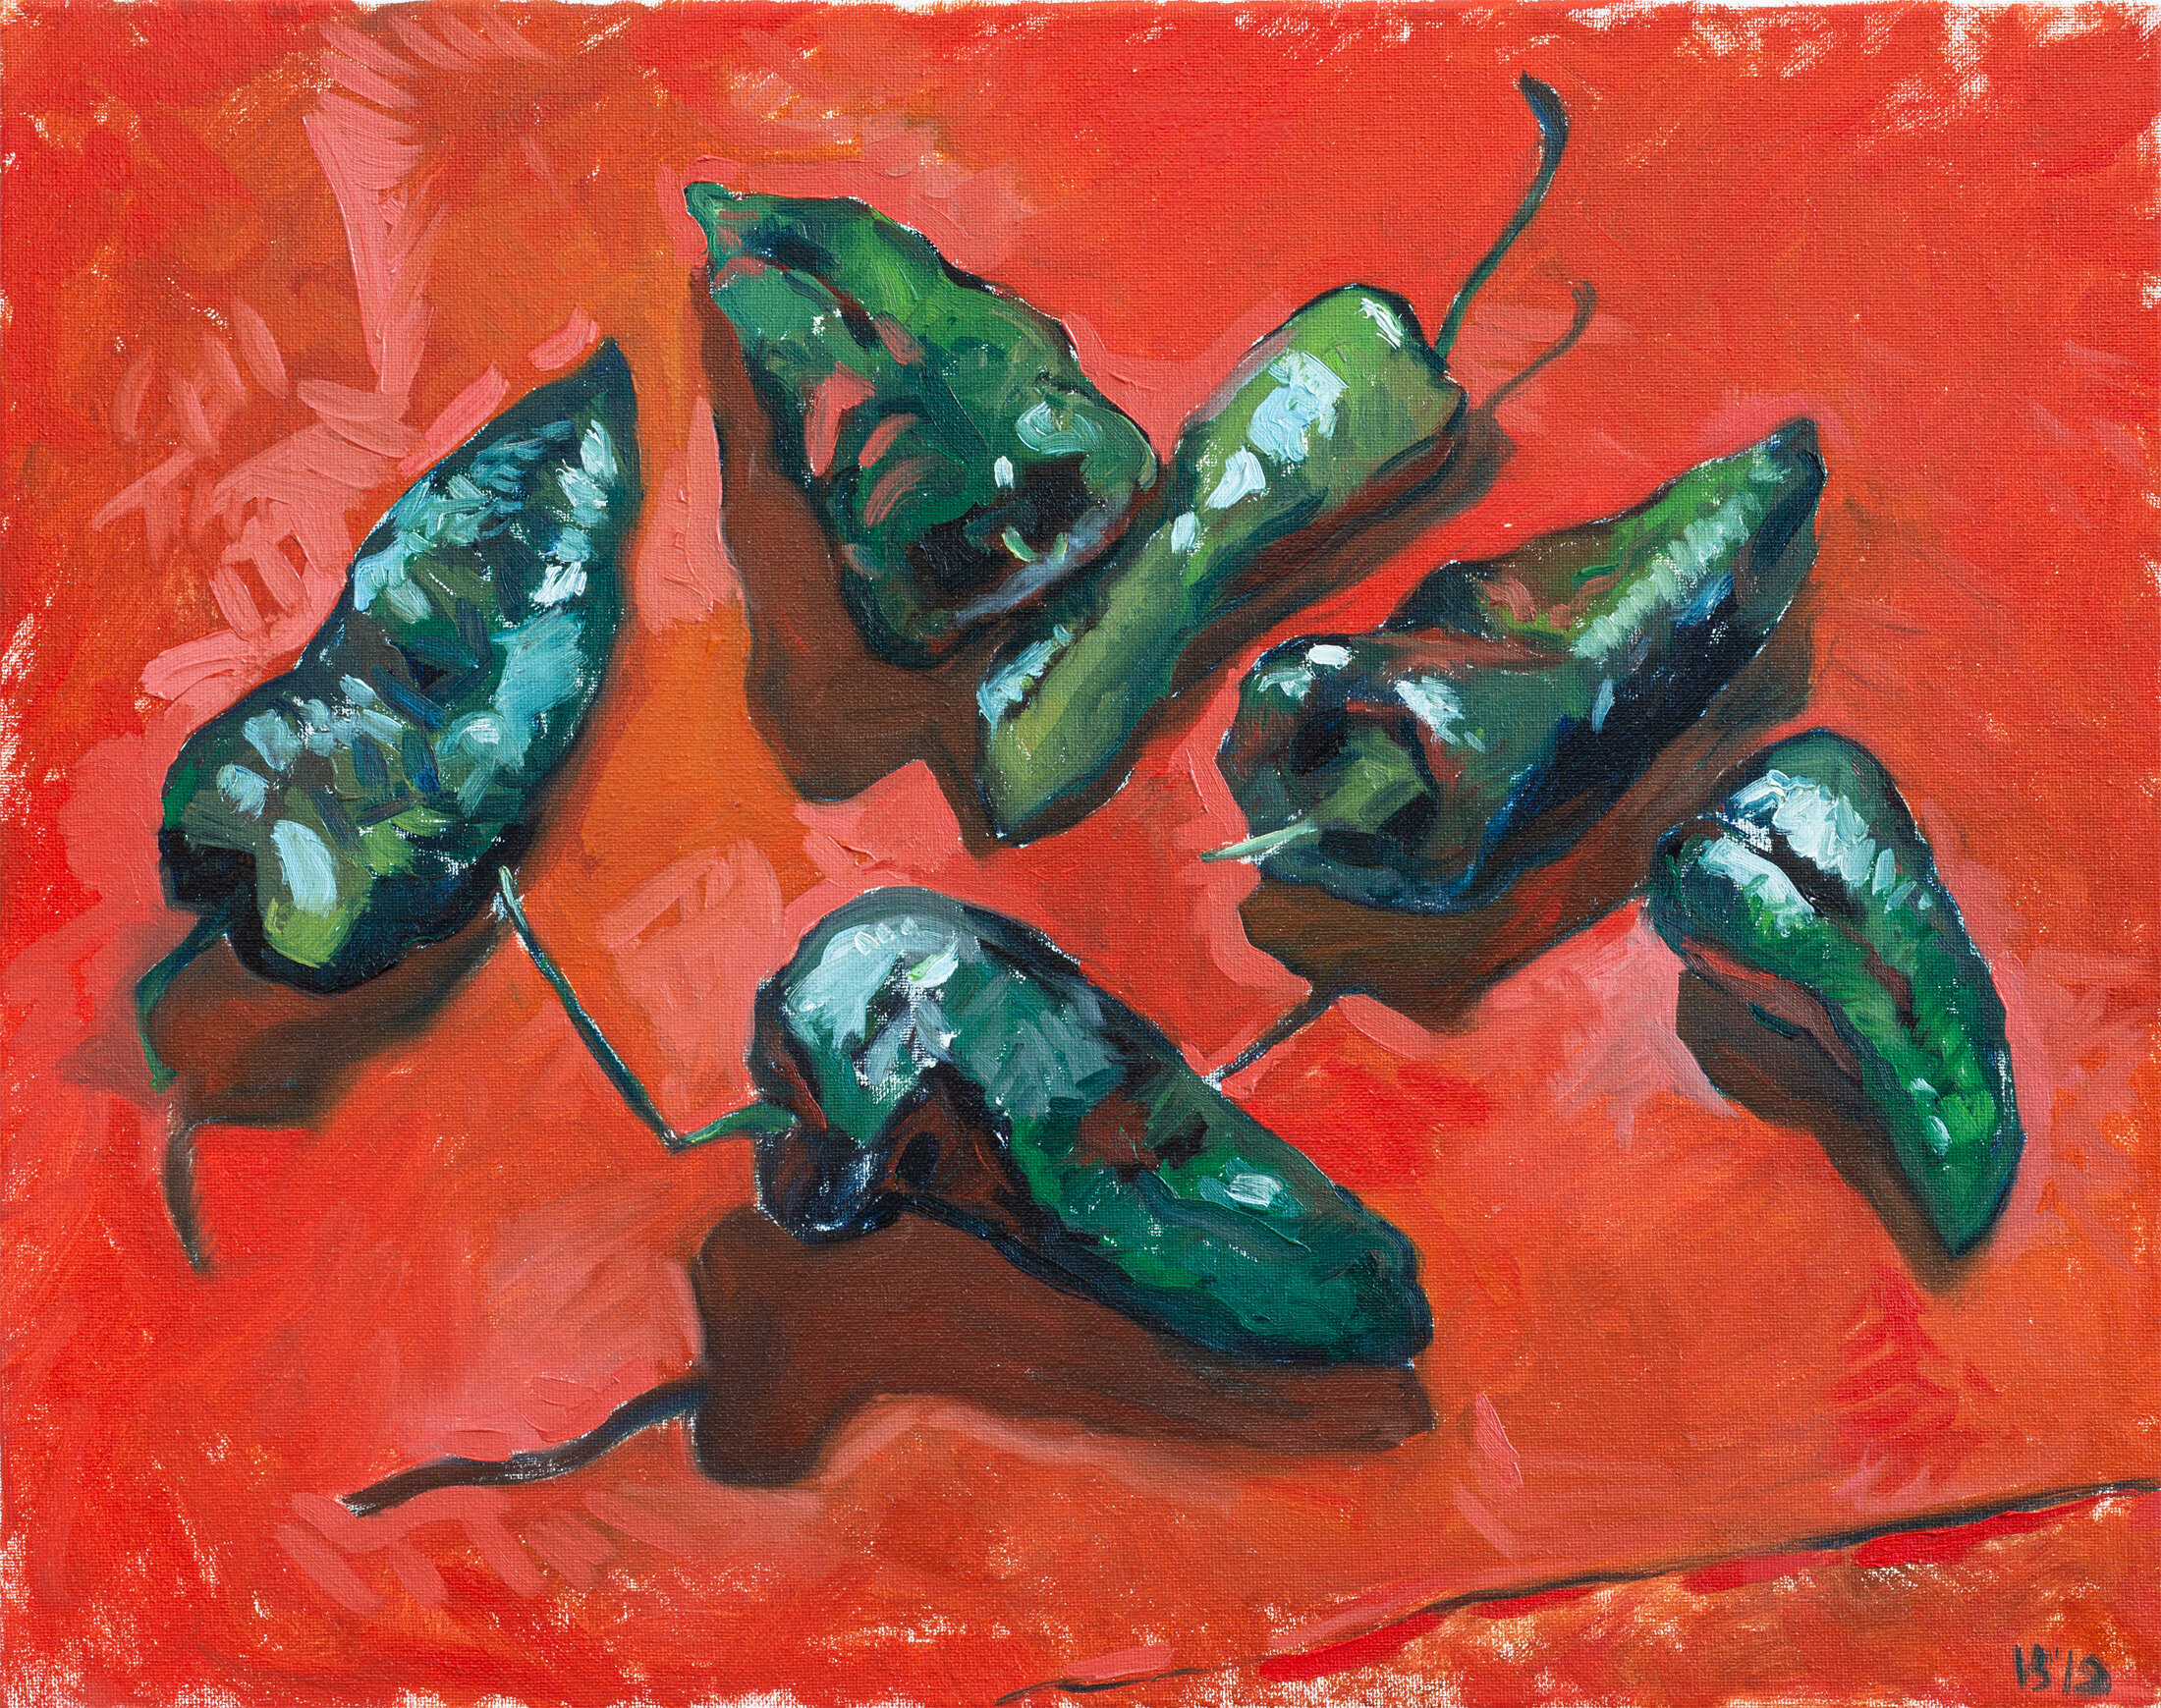 Still Life with Poblano Peppers, 2019 - oil on canvas, 20x16in